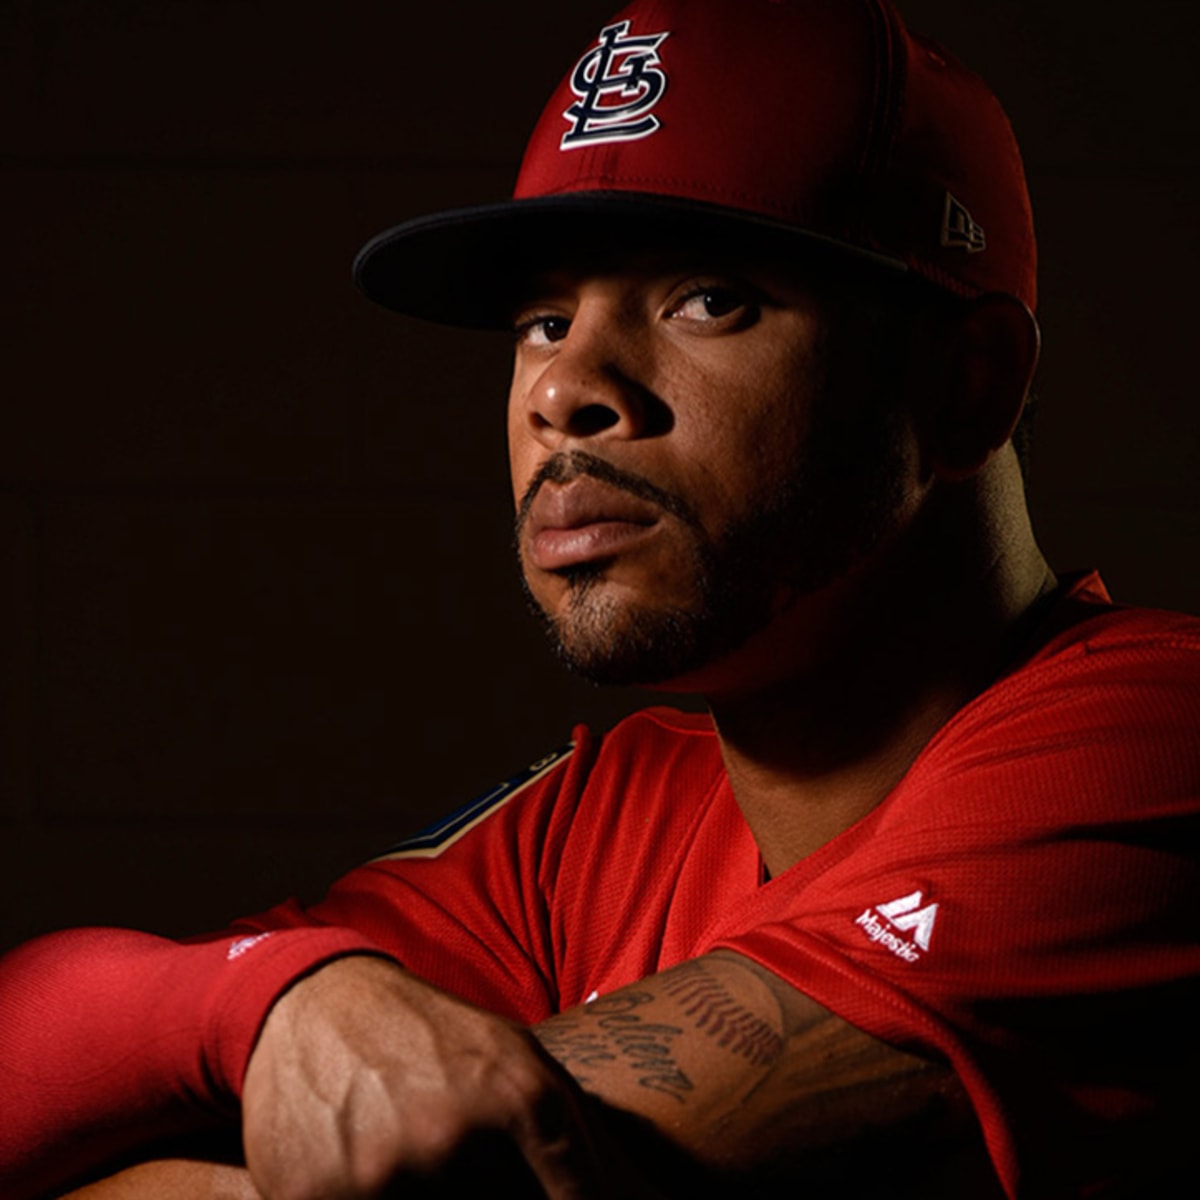 Cardinals OF Tommy Pham sounds off about his road to the big